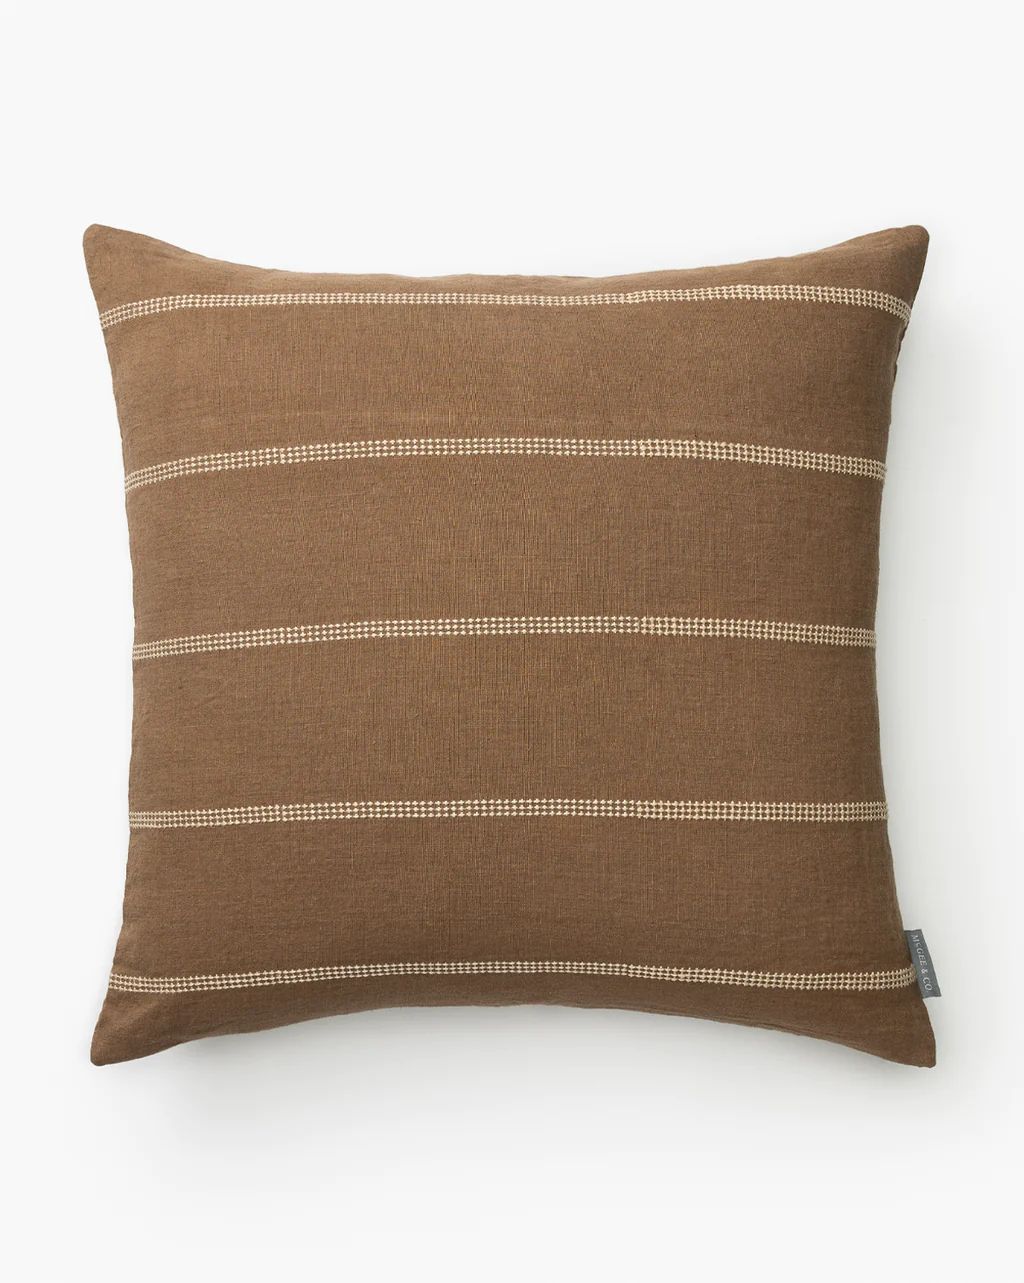 Ryder Pillow Cover | McGee & Co.